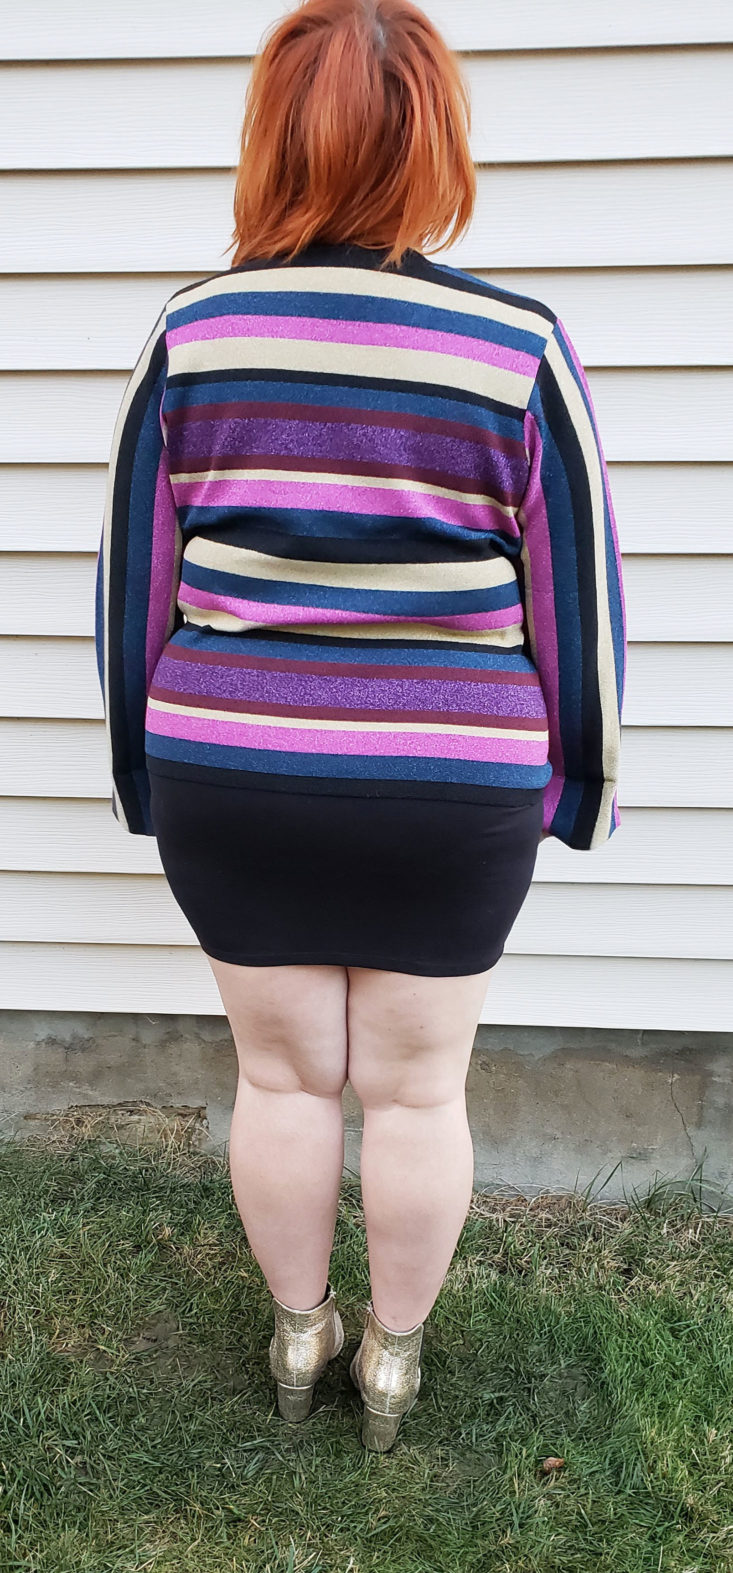 Trunk Club Plus Size Subscription Box Review November 2018 - Veda Sequin Sweater Tank by RACHEL by Rachel Roy 4 Back